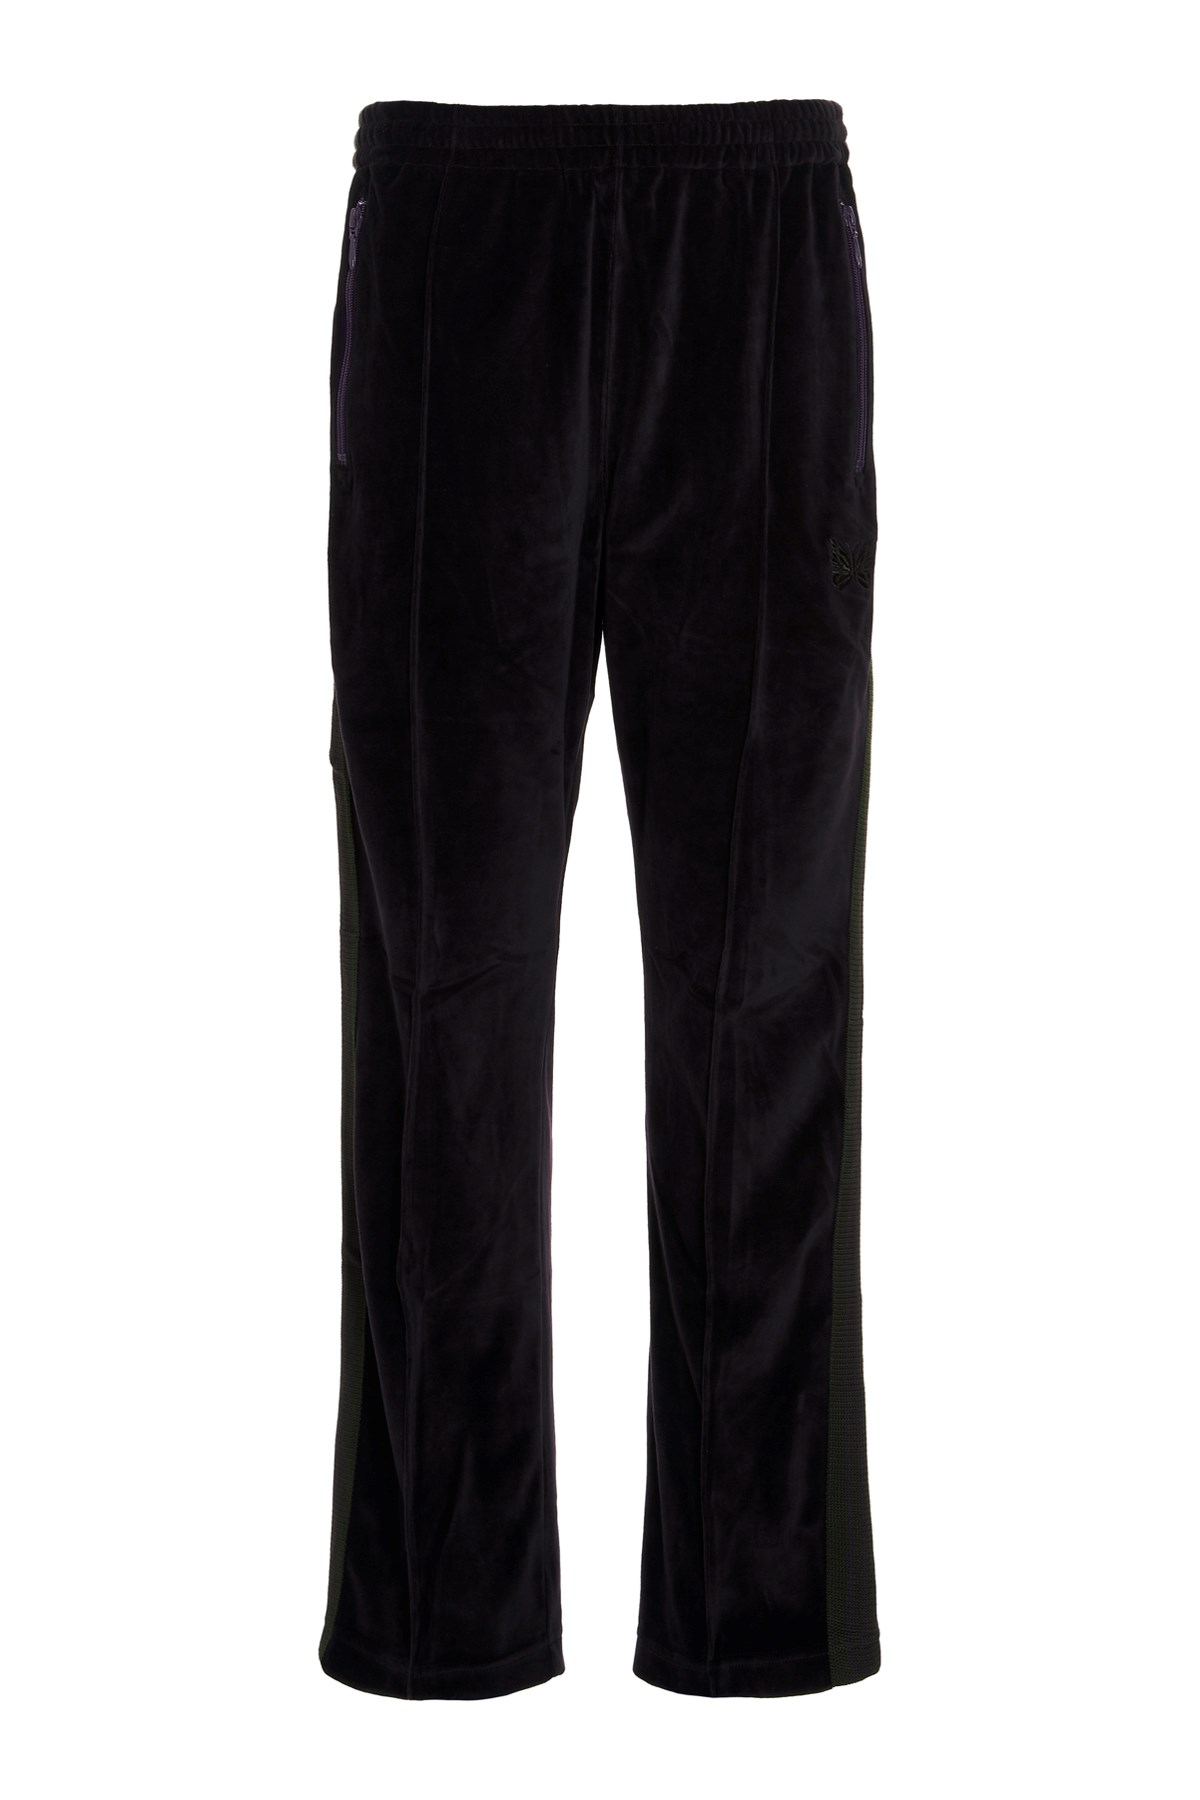 NEEDLES Contrasting Side Band Joggers